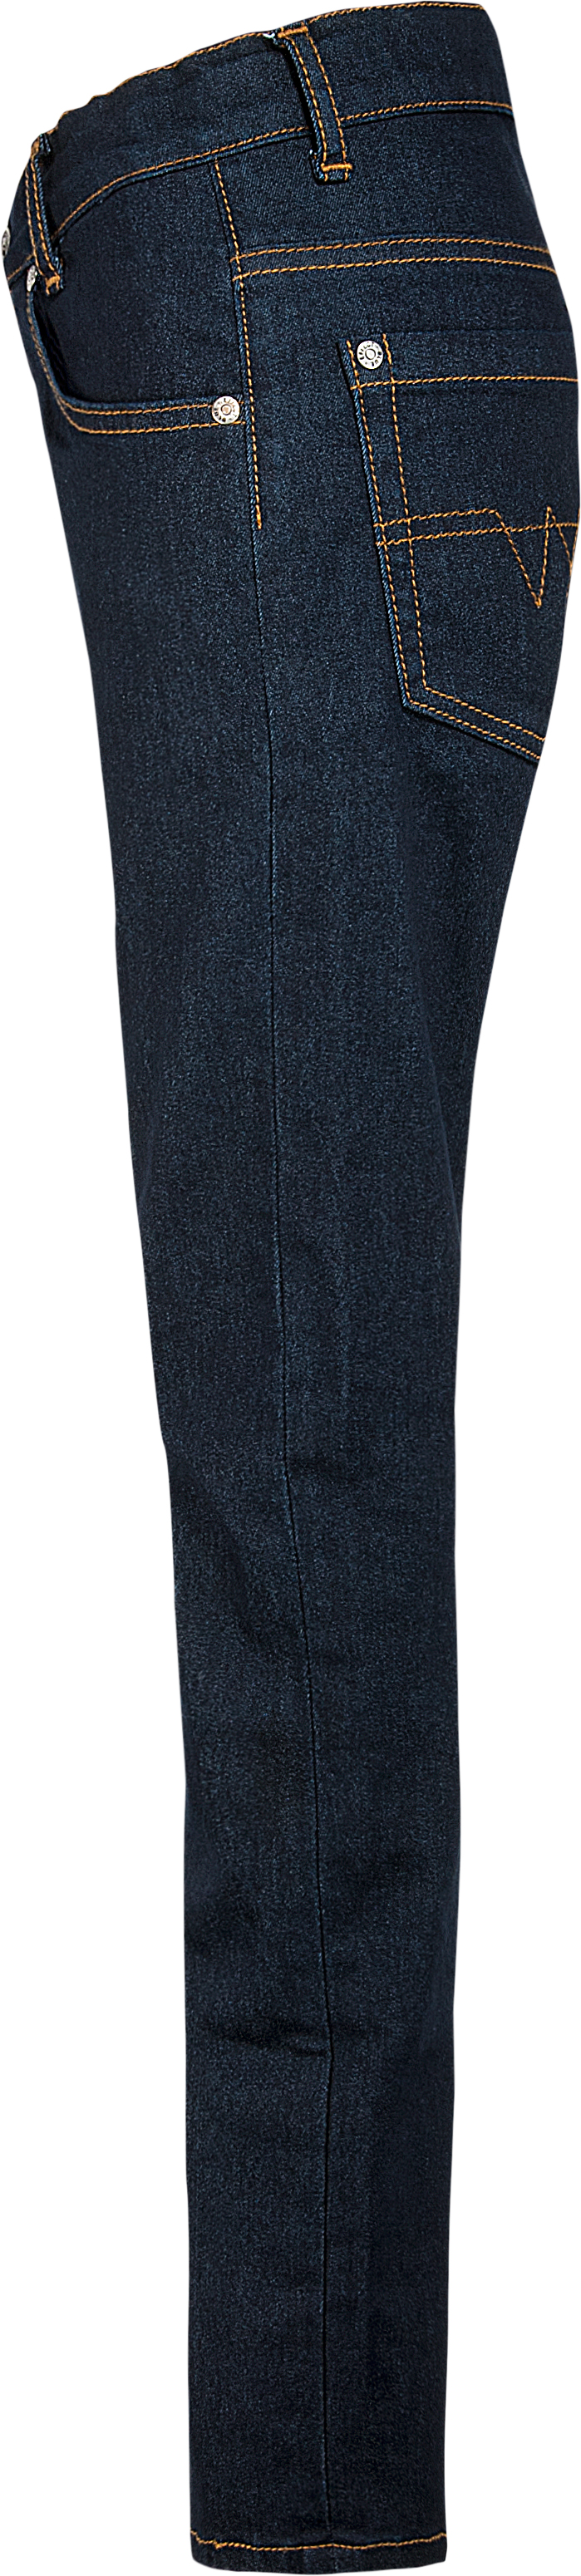 0229-NOS Boys Jeans Skinny available in Slim,Normal,Wide